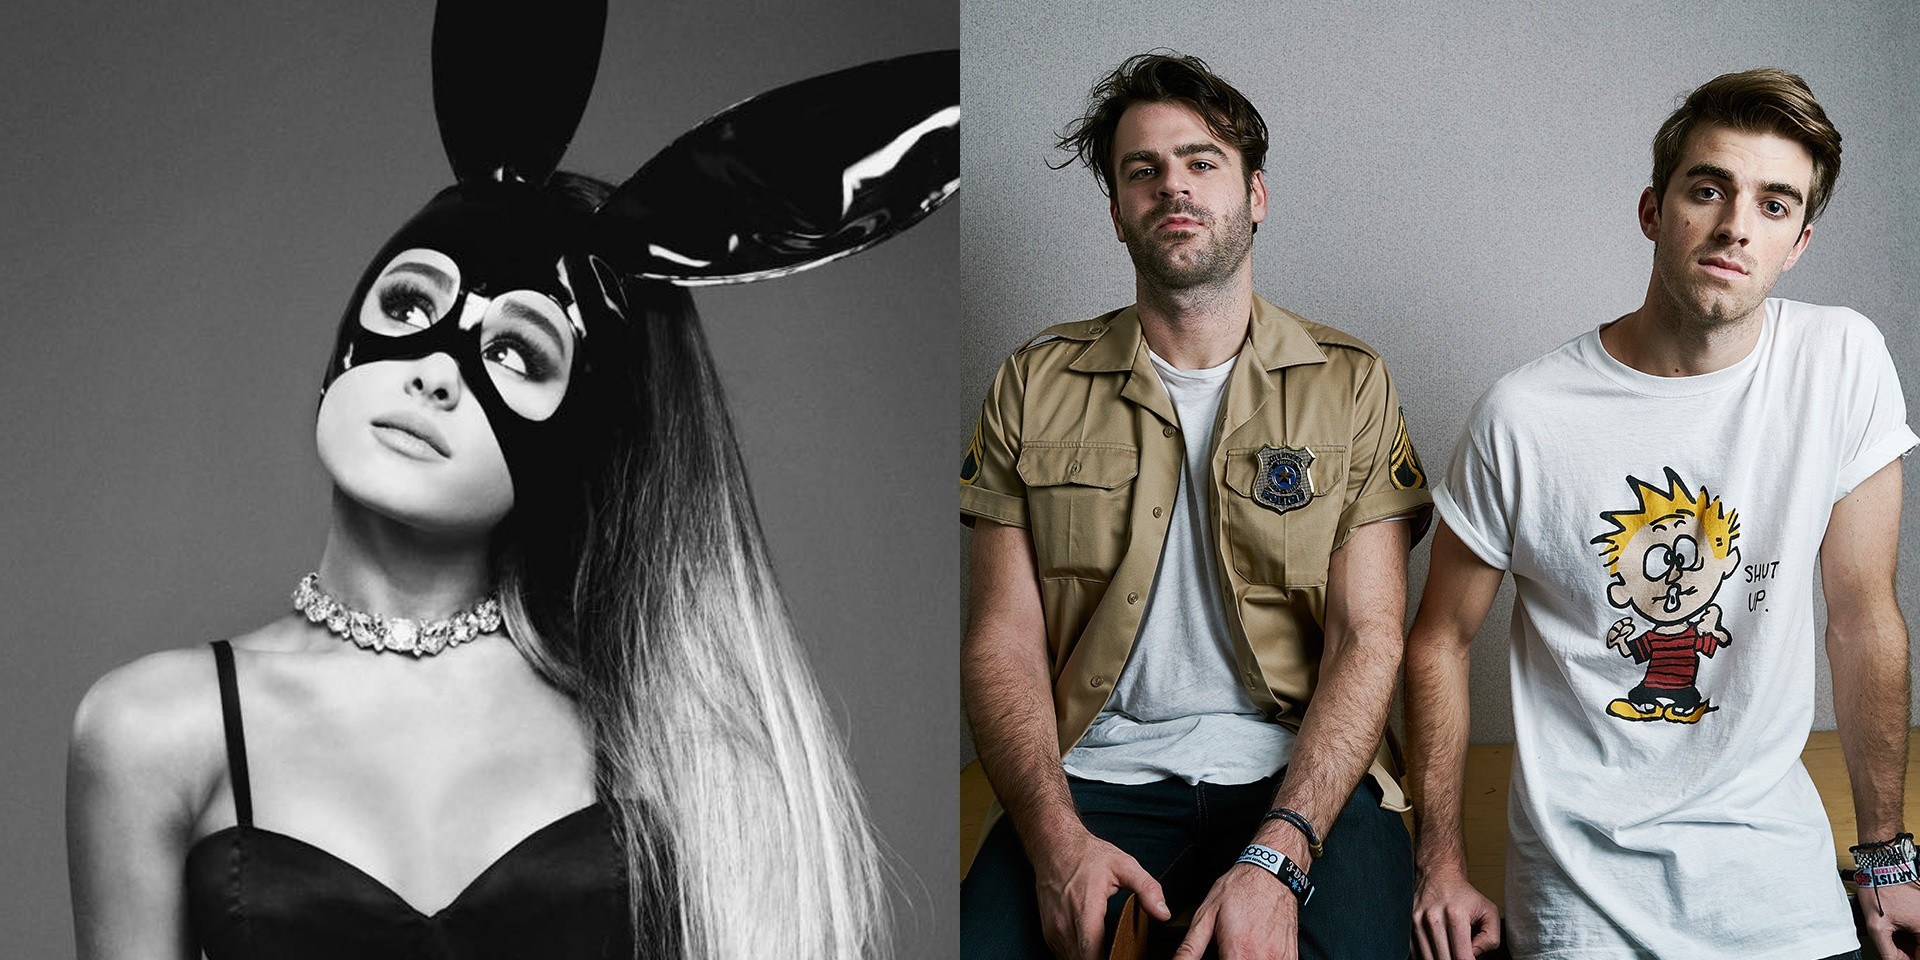 Singapore F1 performers revealed for 2017 — Ariana Grande, The Chainsmokers, Lianne La Havas, Duran Duran, and more